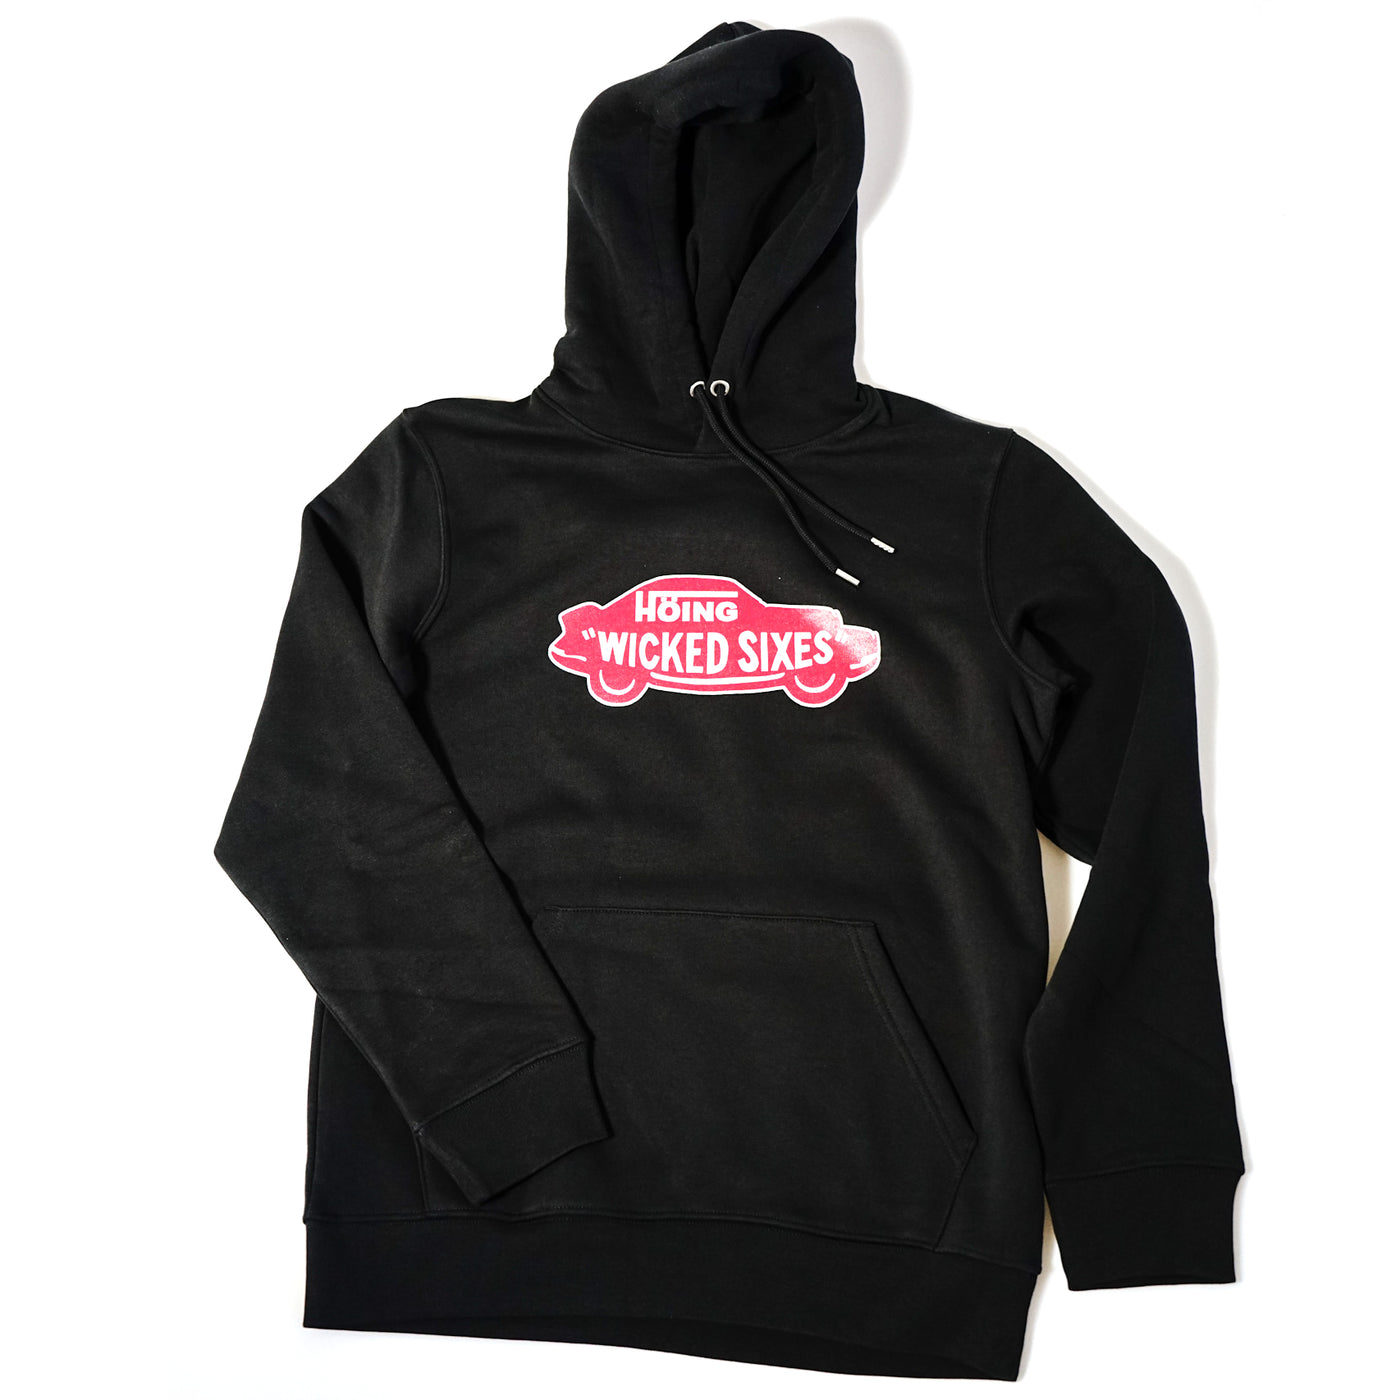 Höing Wicked Sixes Off The Wall Hoodie